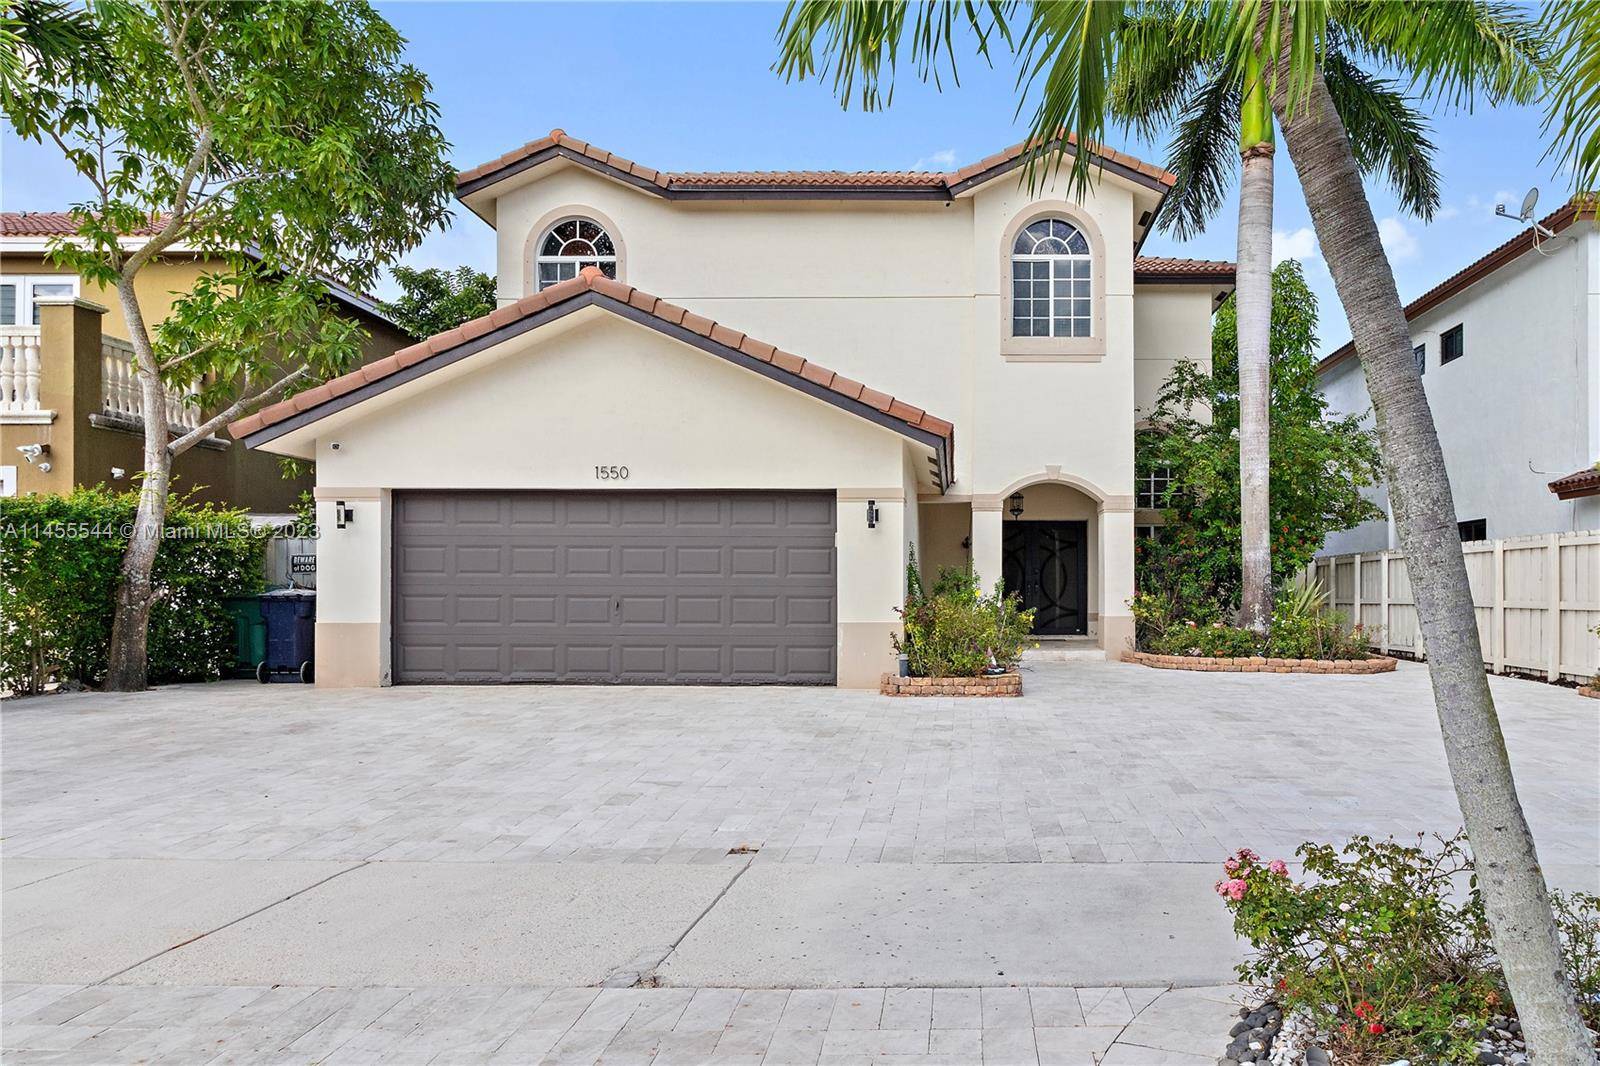 Luxurious home 5 bedrooms, 3 bath, 2 car garage, large master suite, Entertainers backyard featuring pool outdoor kitchen, amazing location with easy access to major highways close to shopping and ...